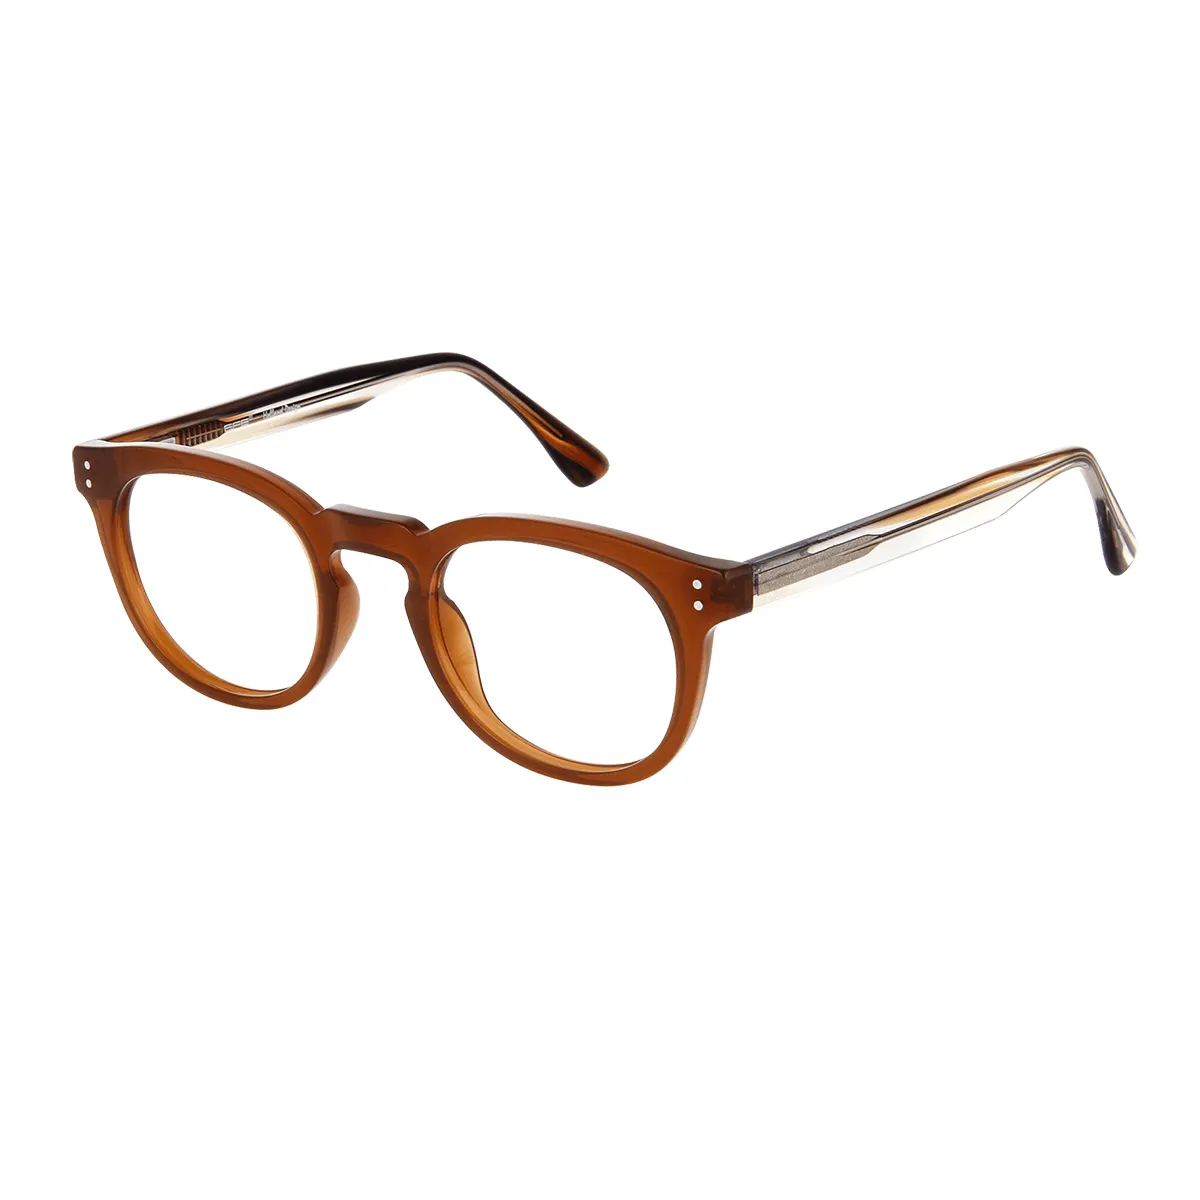 Annette - Oval Wood Texture Glasses for Women - EFE